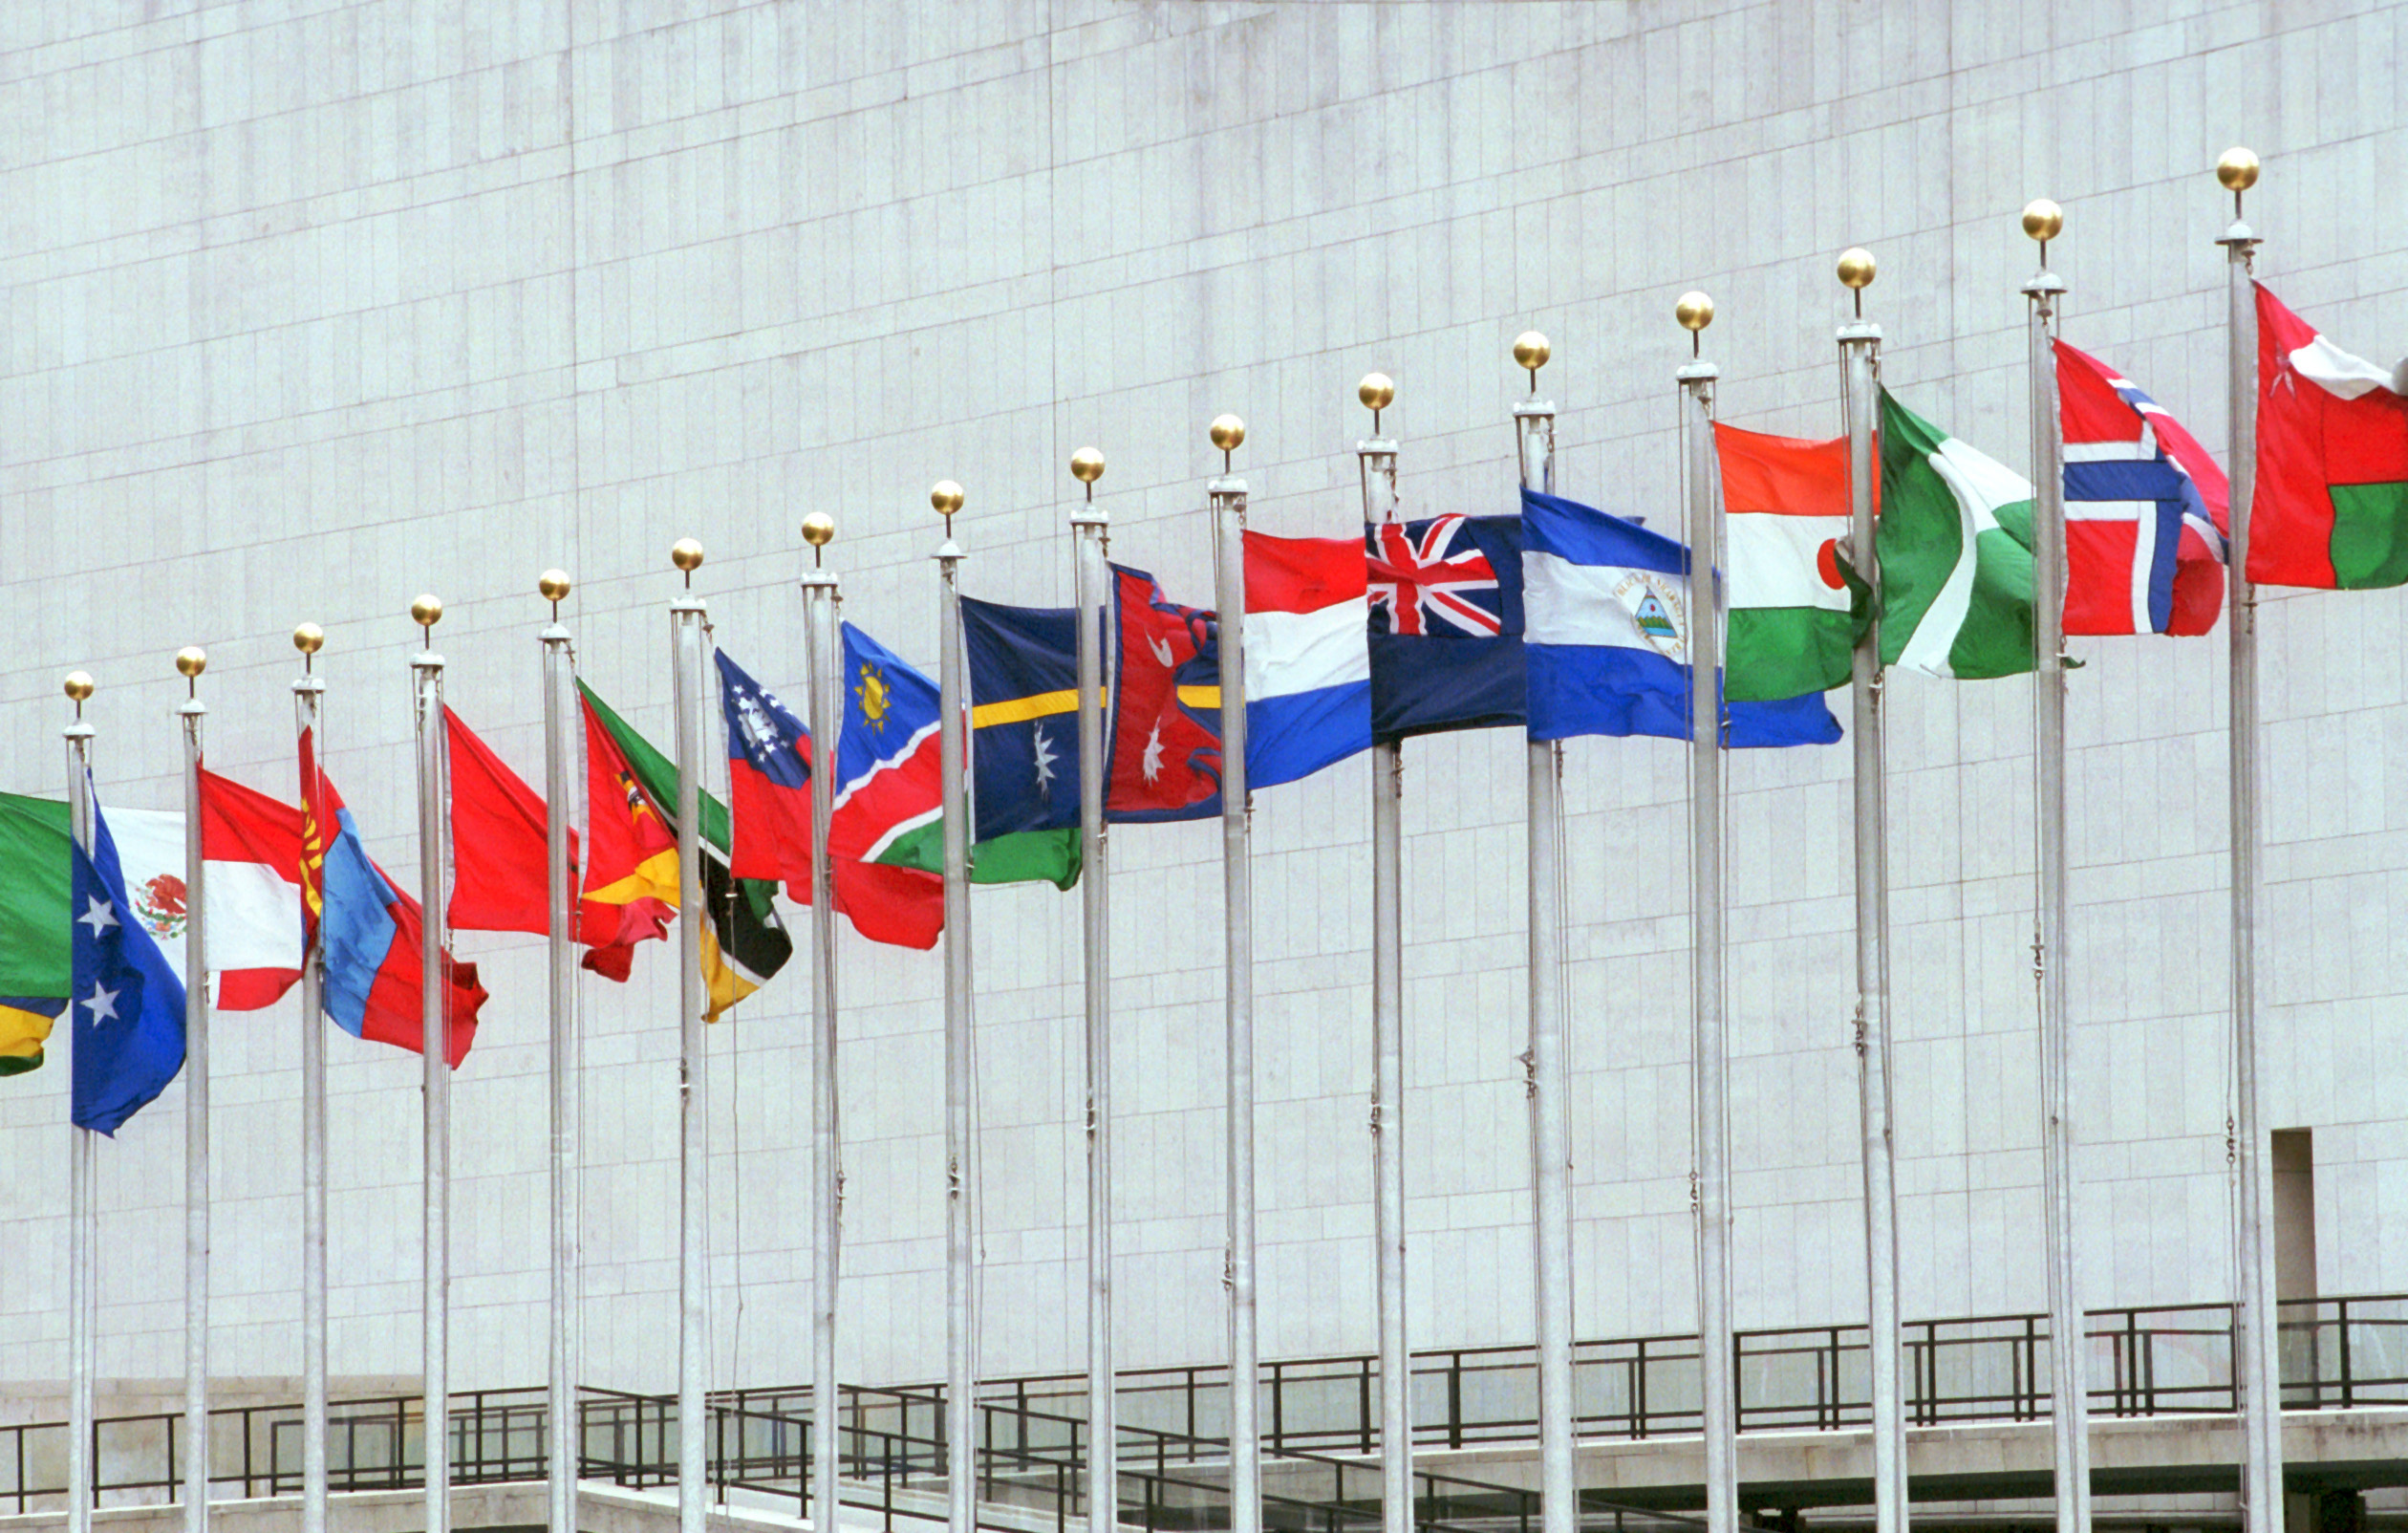 Flags of different nations in front of the main building of the United Nations.